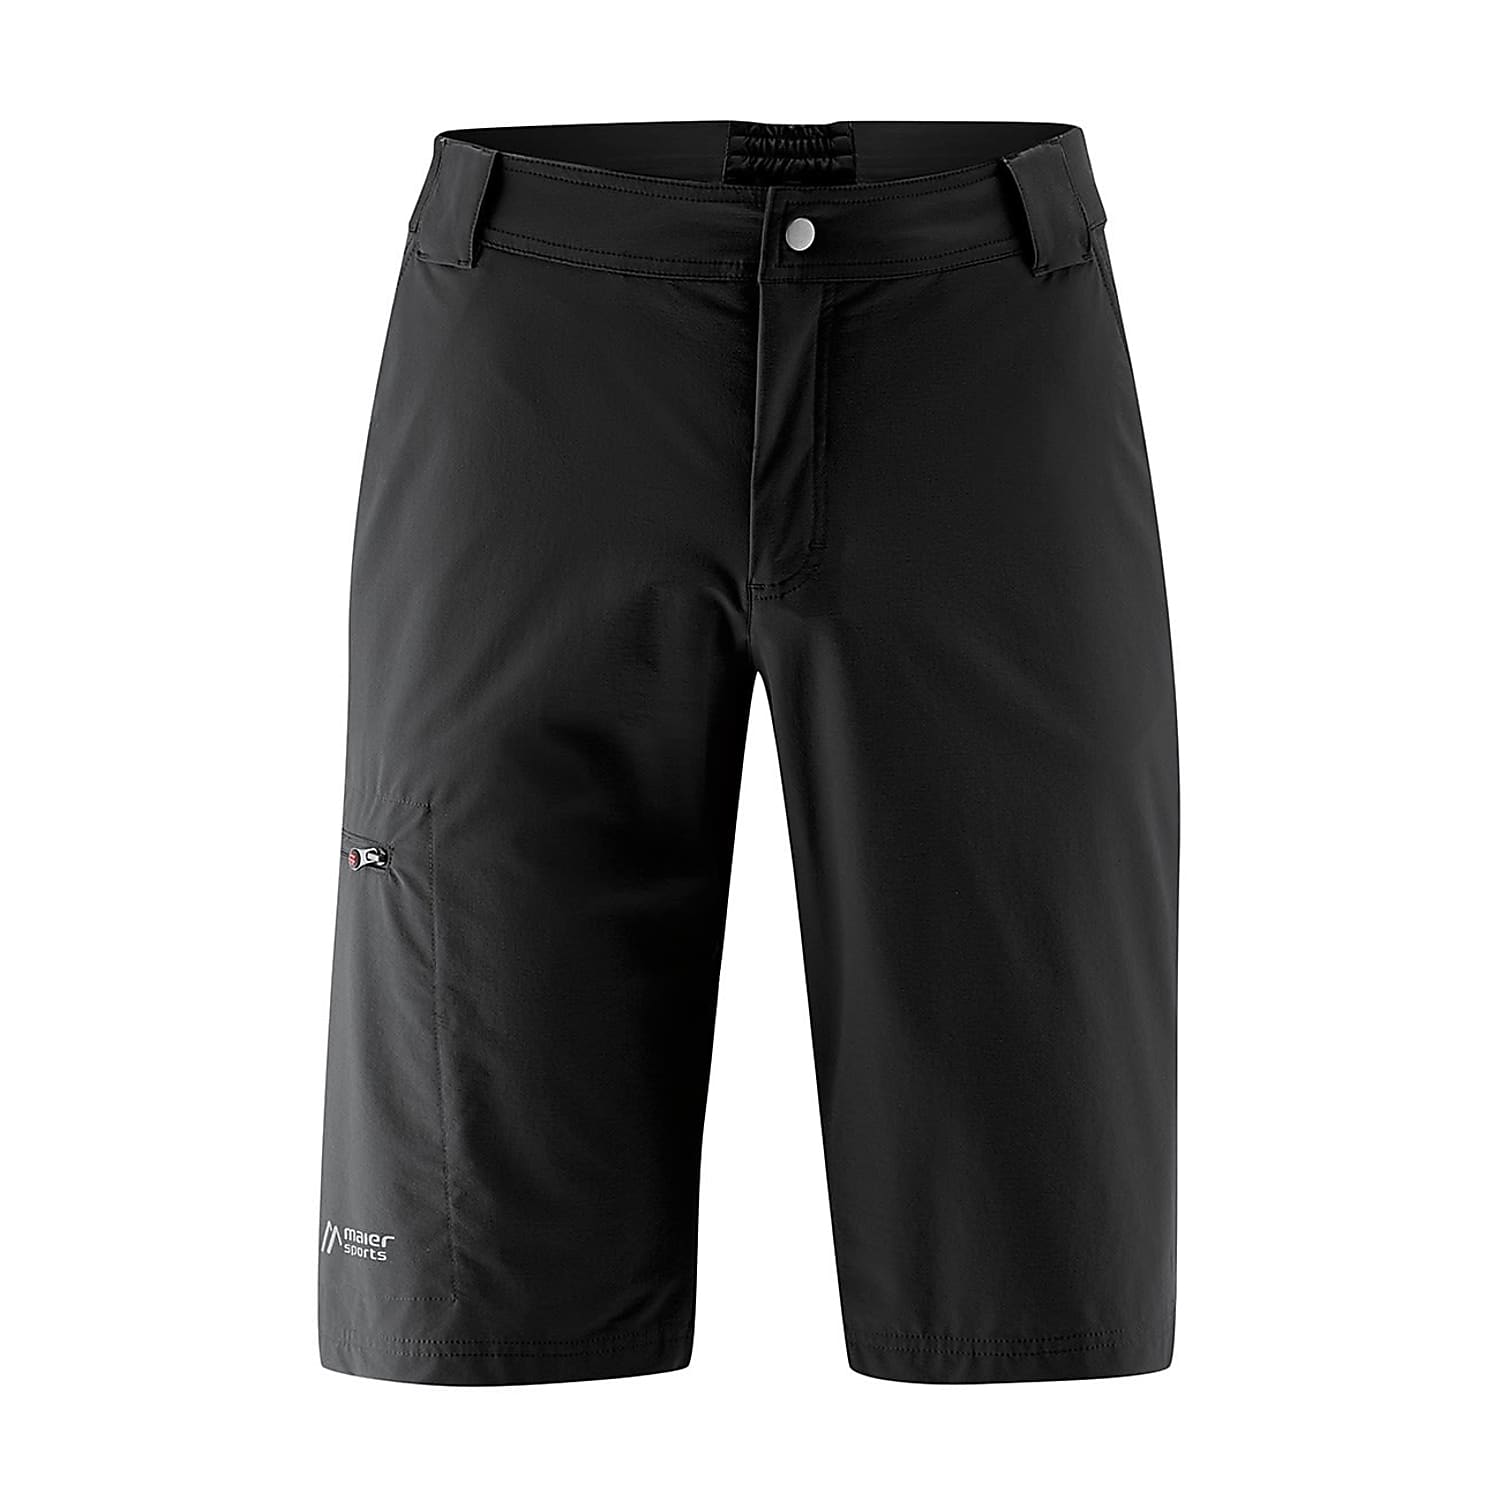 NORIT M cheap Fast Maier SHORT, - Sports shipping Black and